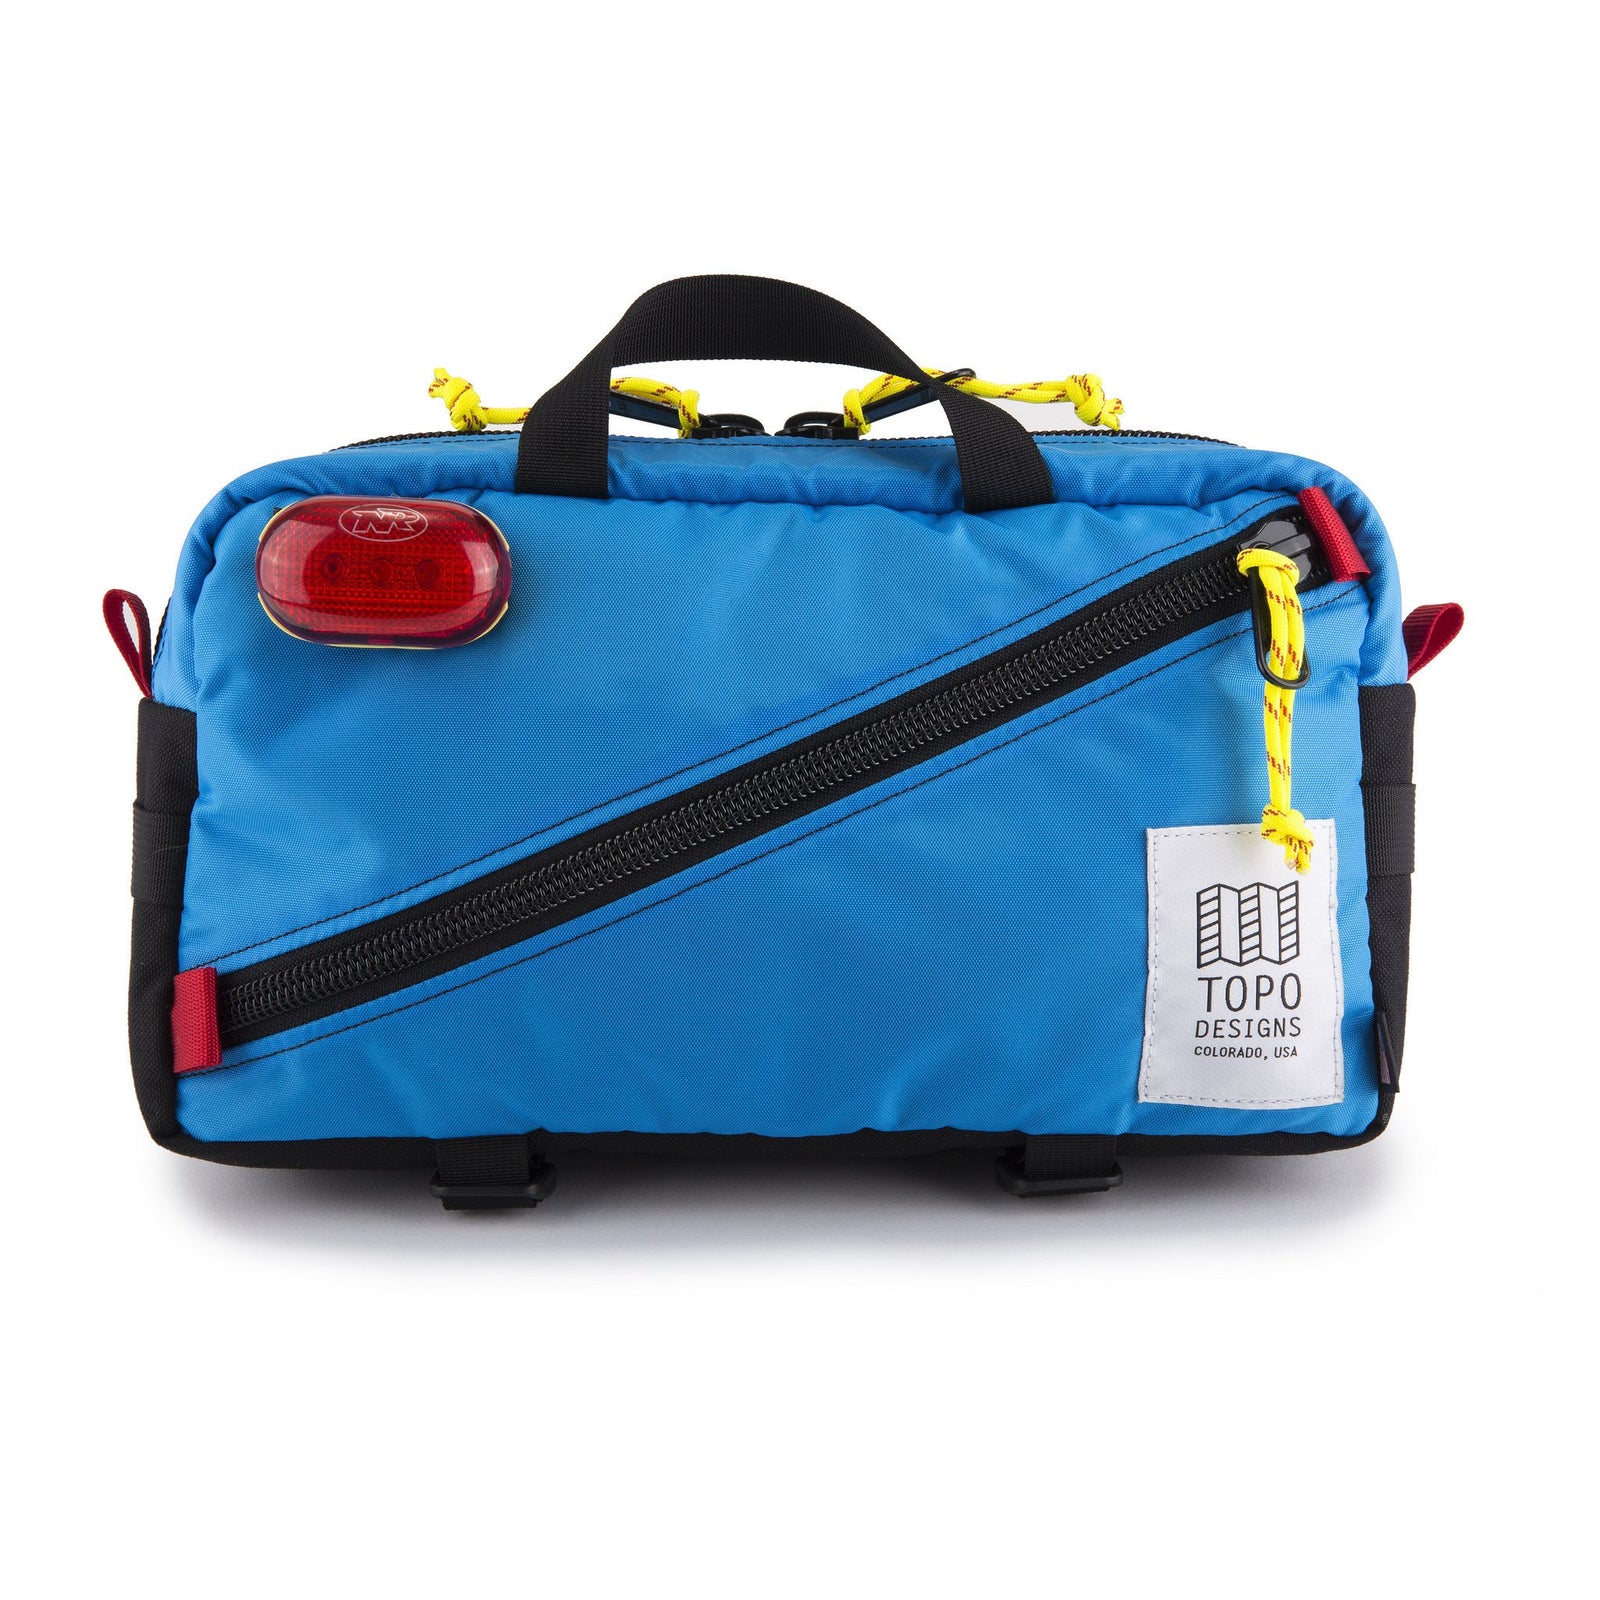 General front product shot of Topo Designs Quick Pack in Blue showing bike light attachment loop.